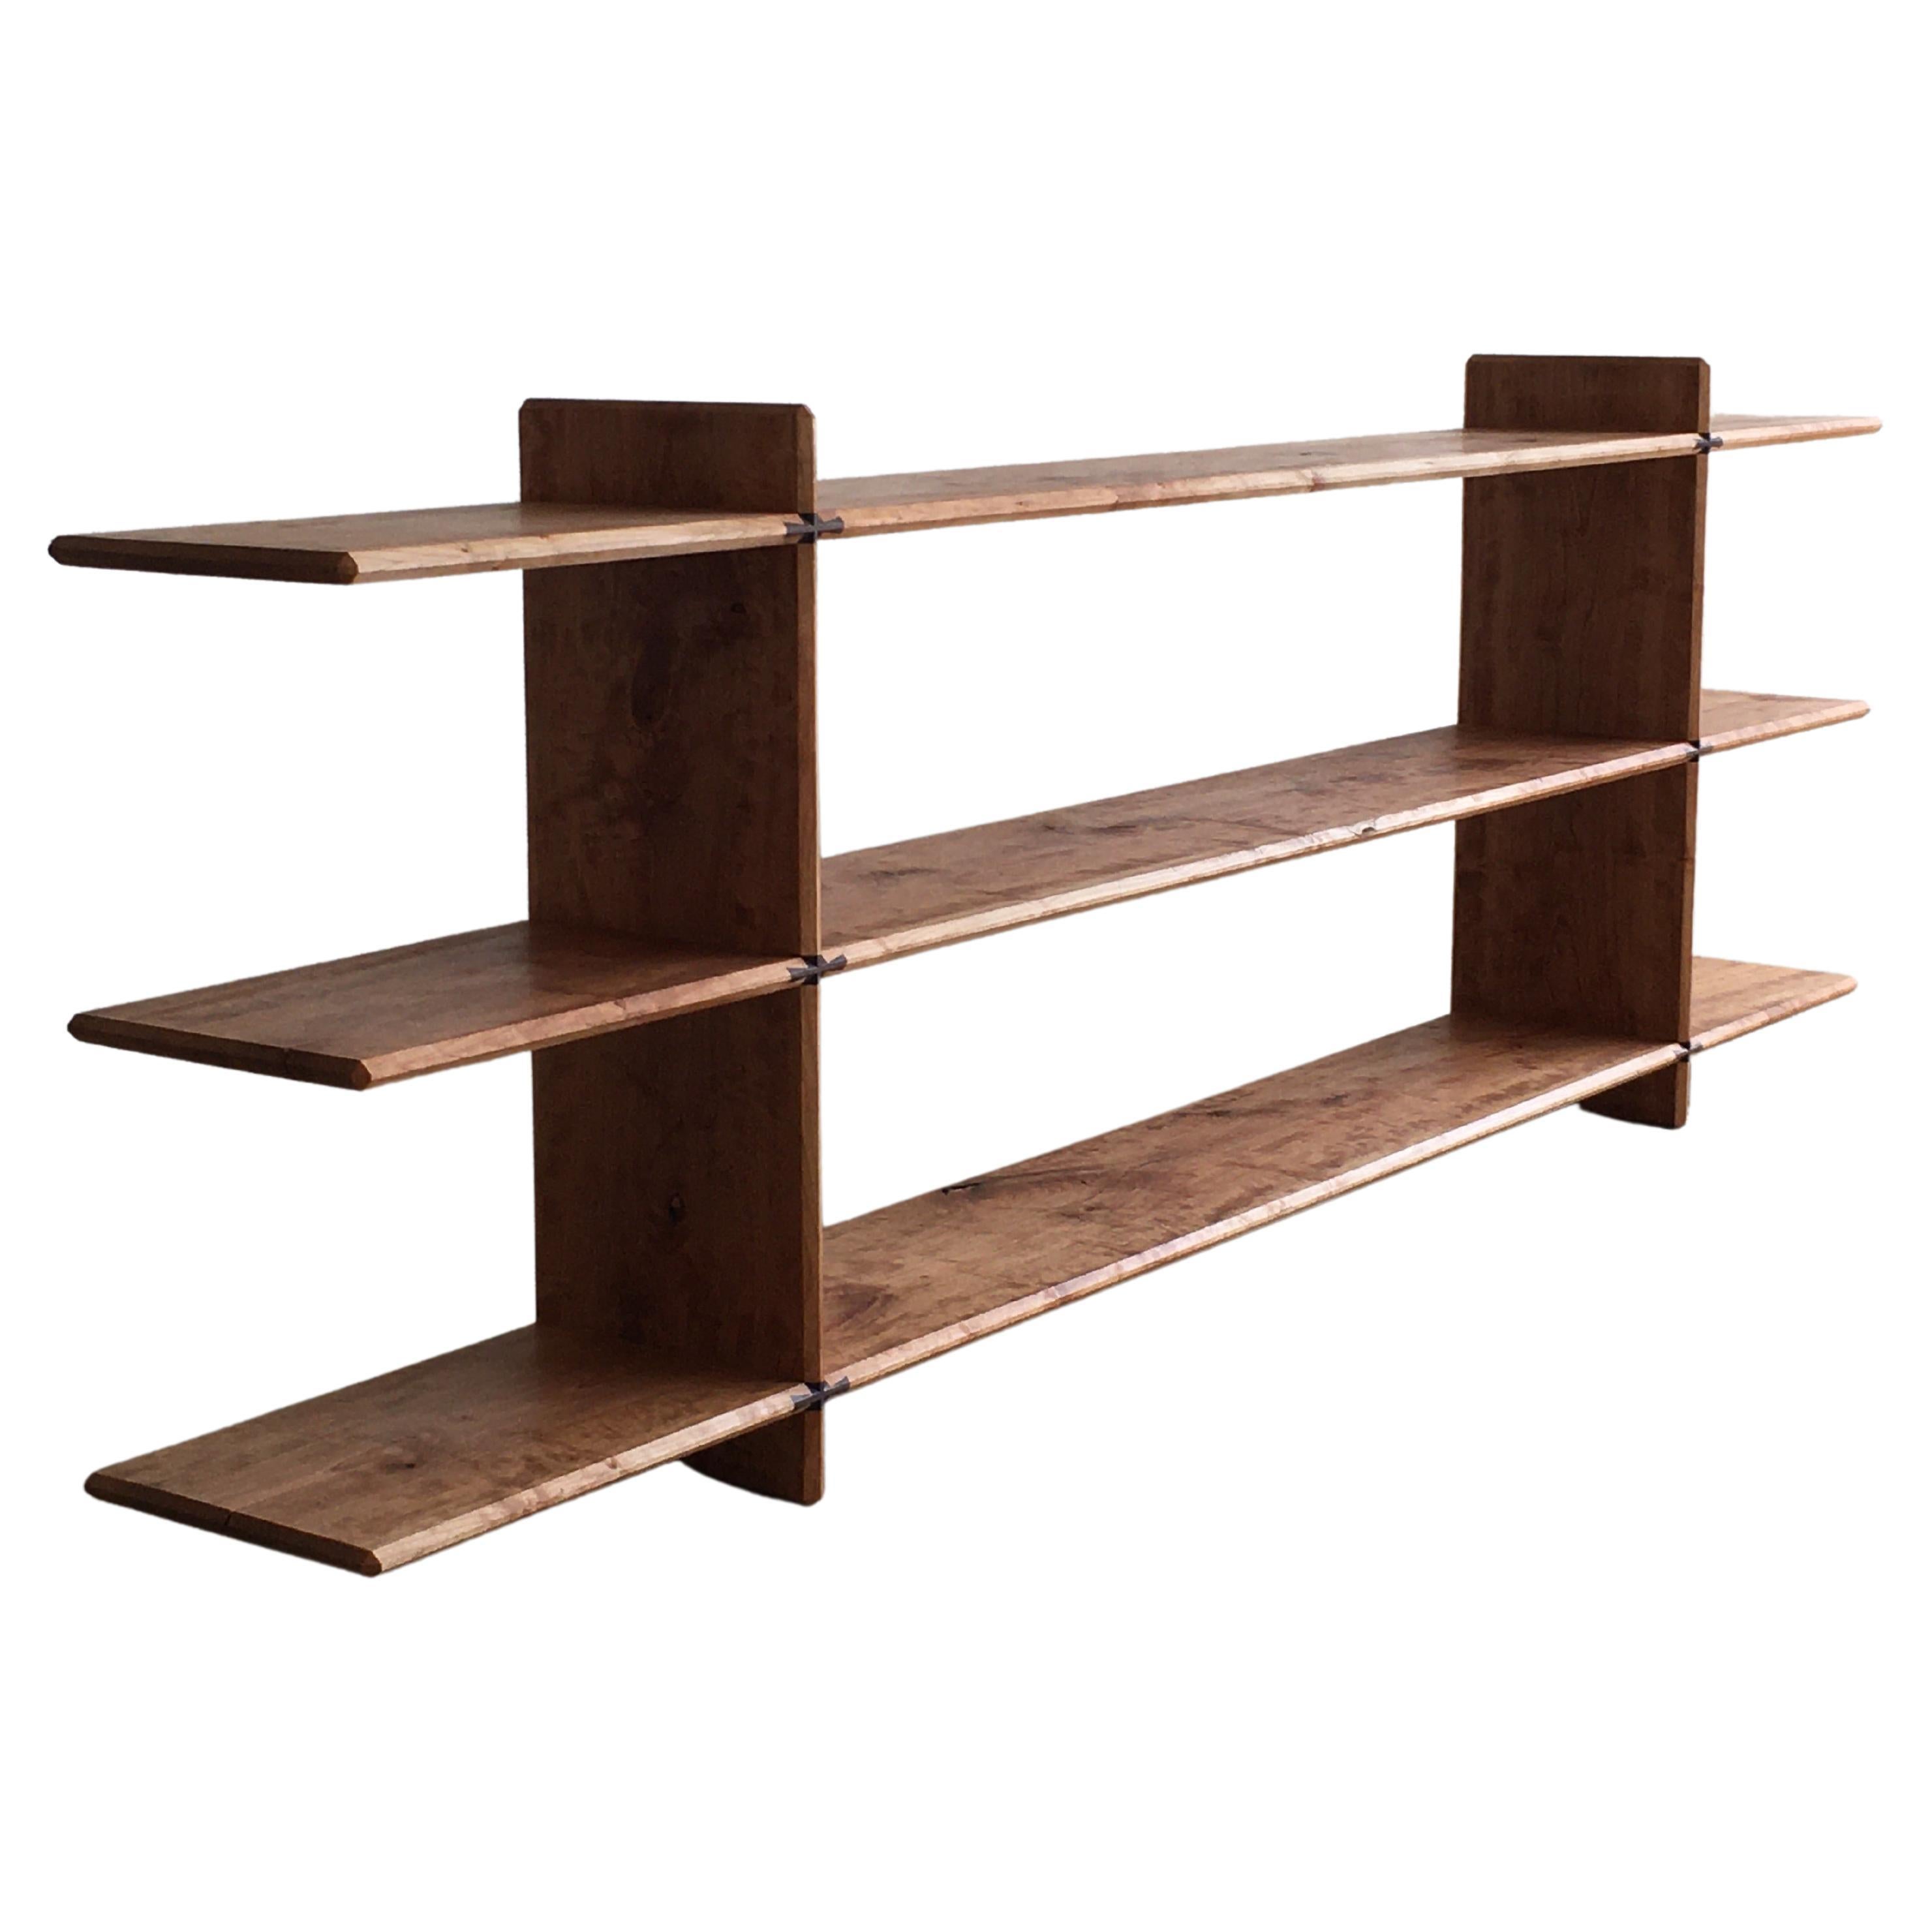 AM Shelve, Solid Cherry Wood, Handmade and Designed by Tomaz Viana For Sale